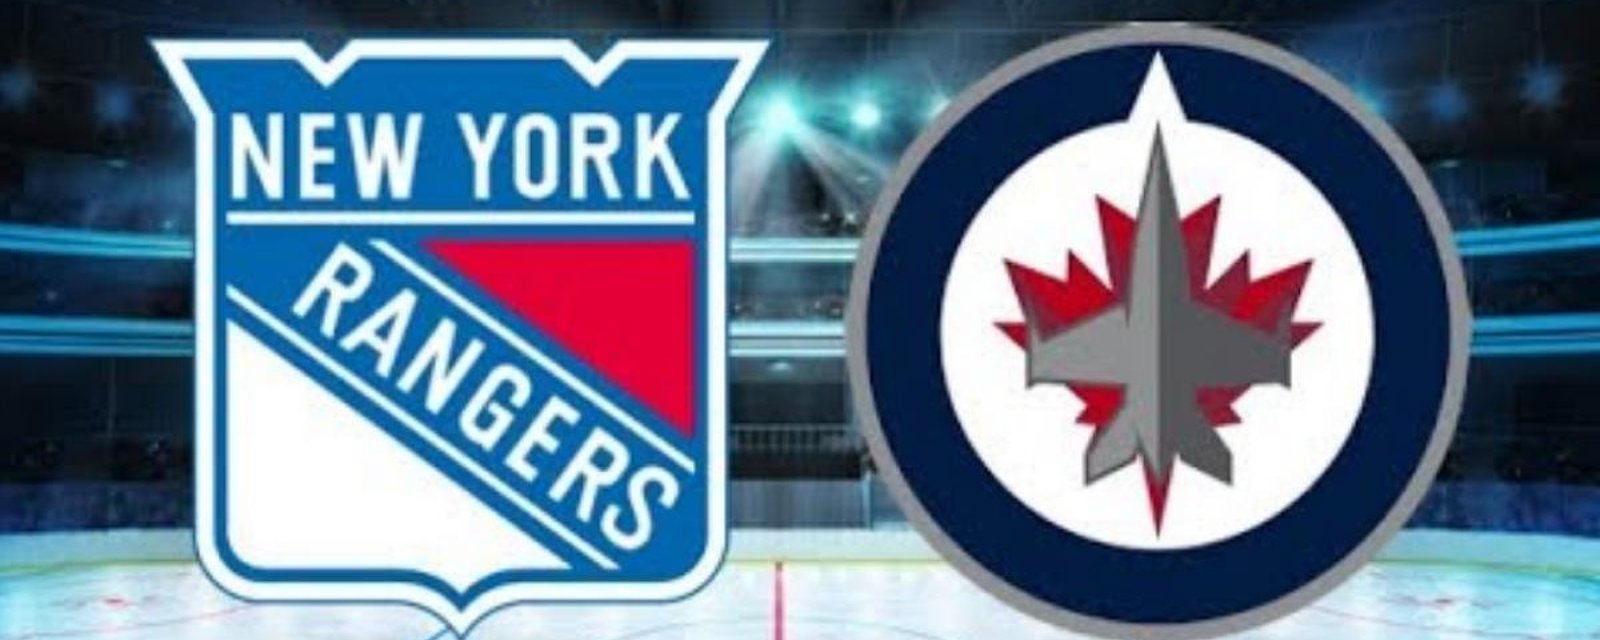 Breaking: Jets and Rangers working on trade involving former 1st round pick.